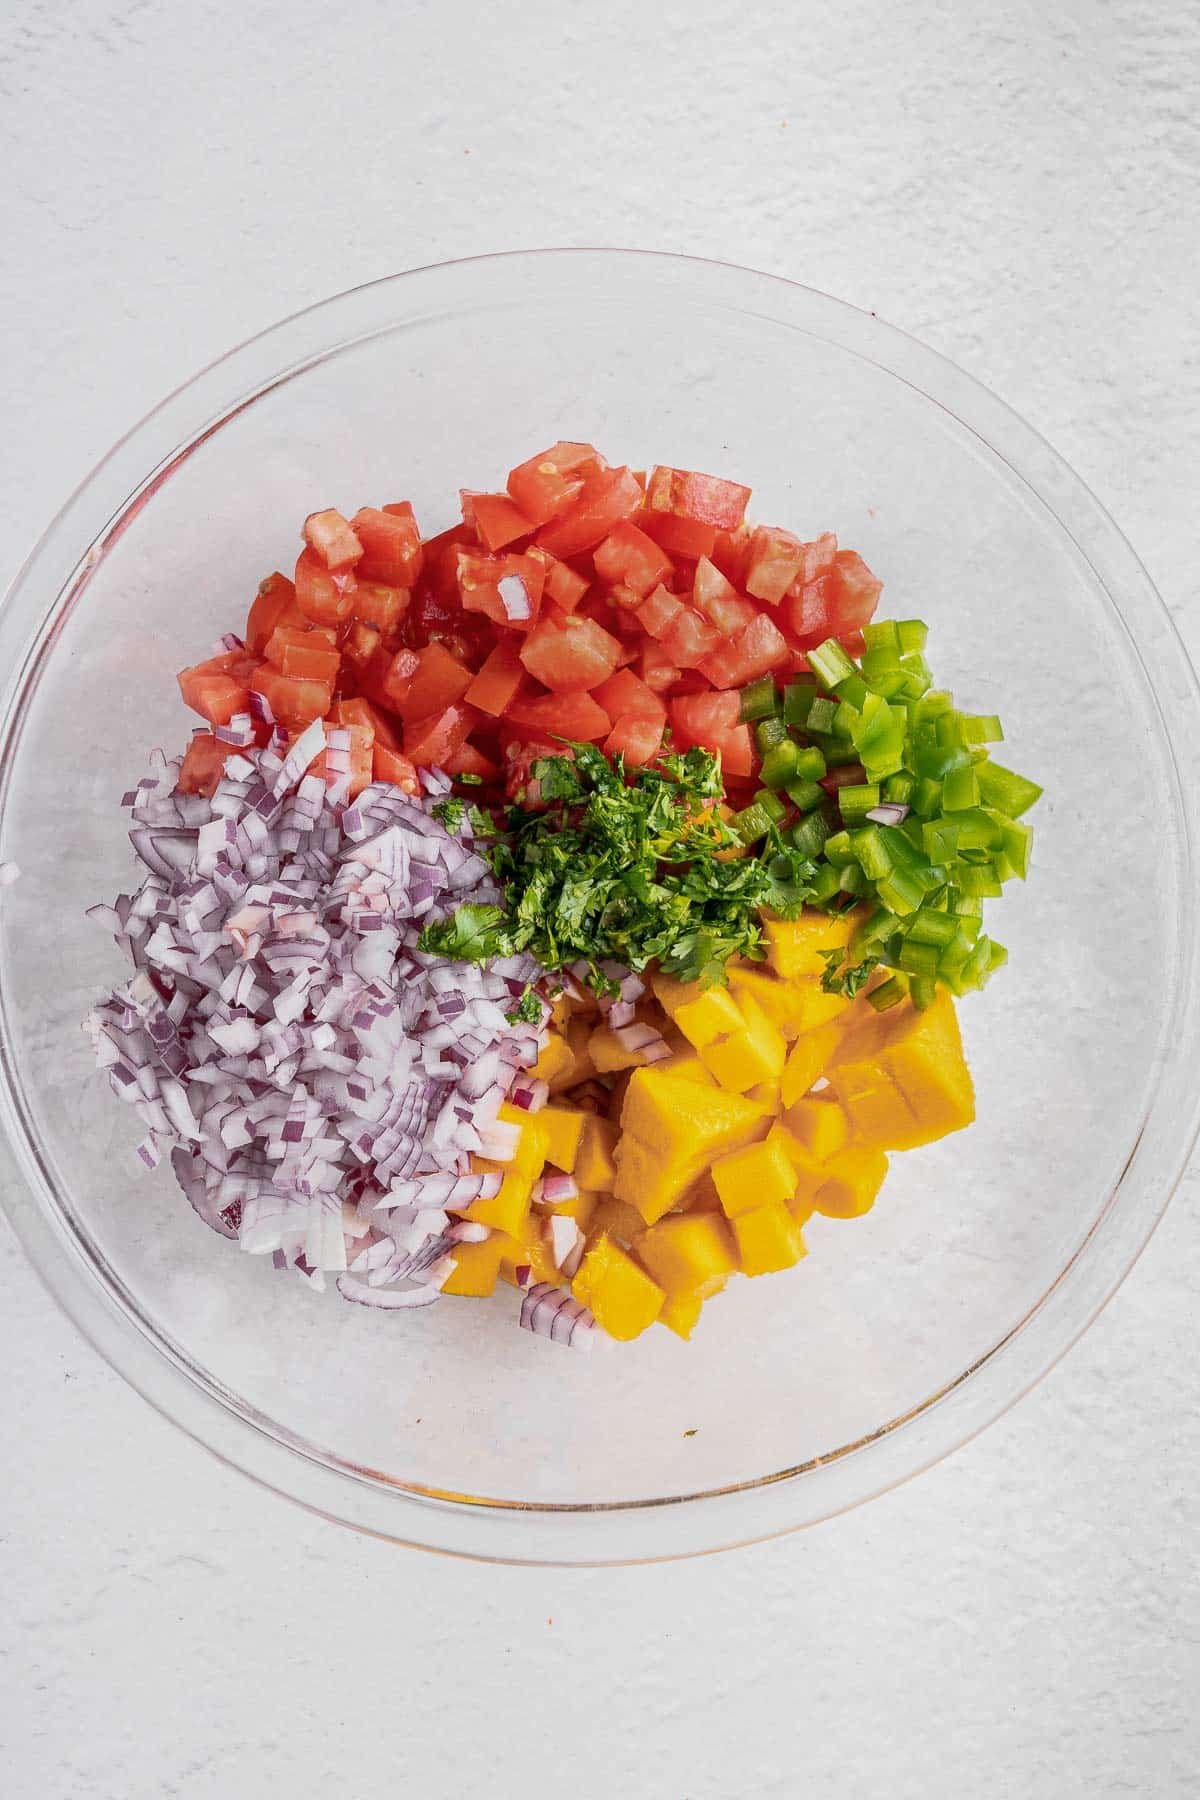 Glass bowl of ingredients for Mango Salsa - Mangos, tomatoes, red onion, jalapeño, cilantro, limes and salt.